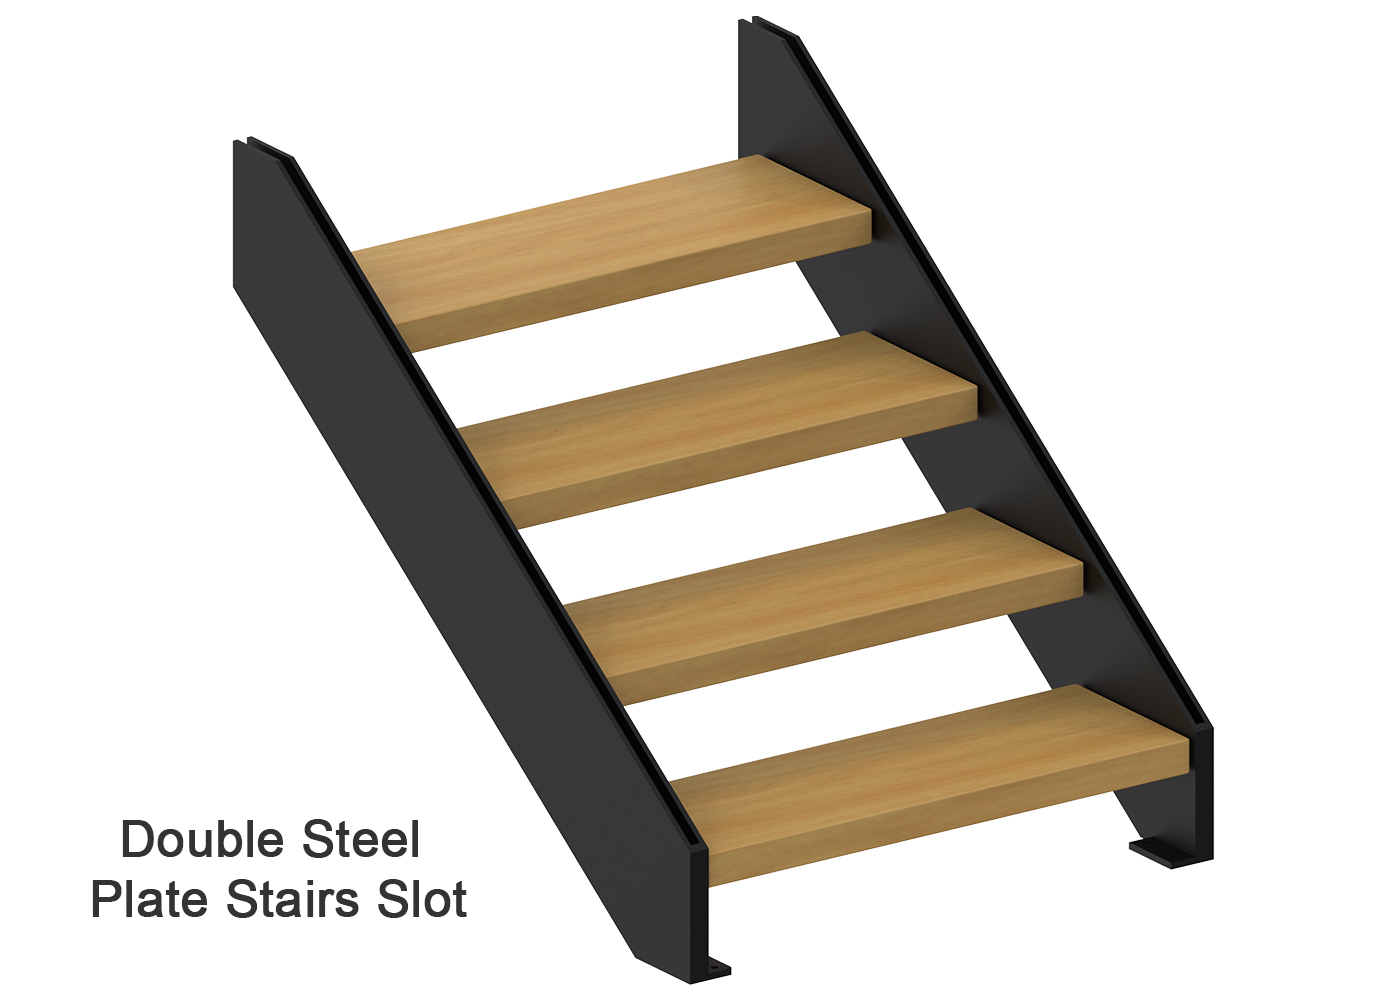 Dobleng Steel Plate Stairs Slot